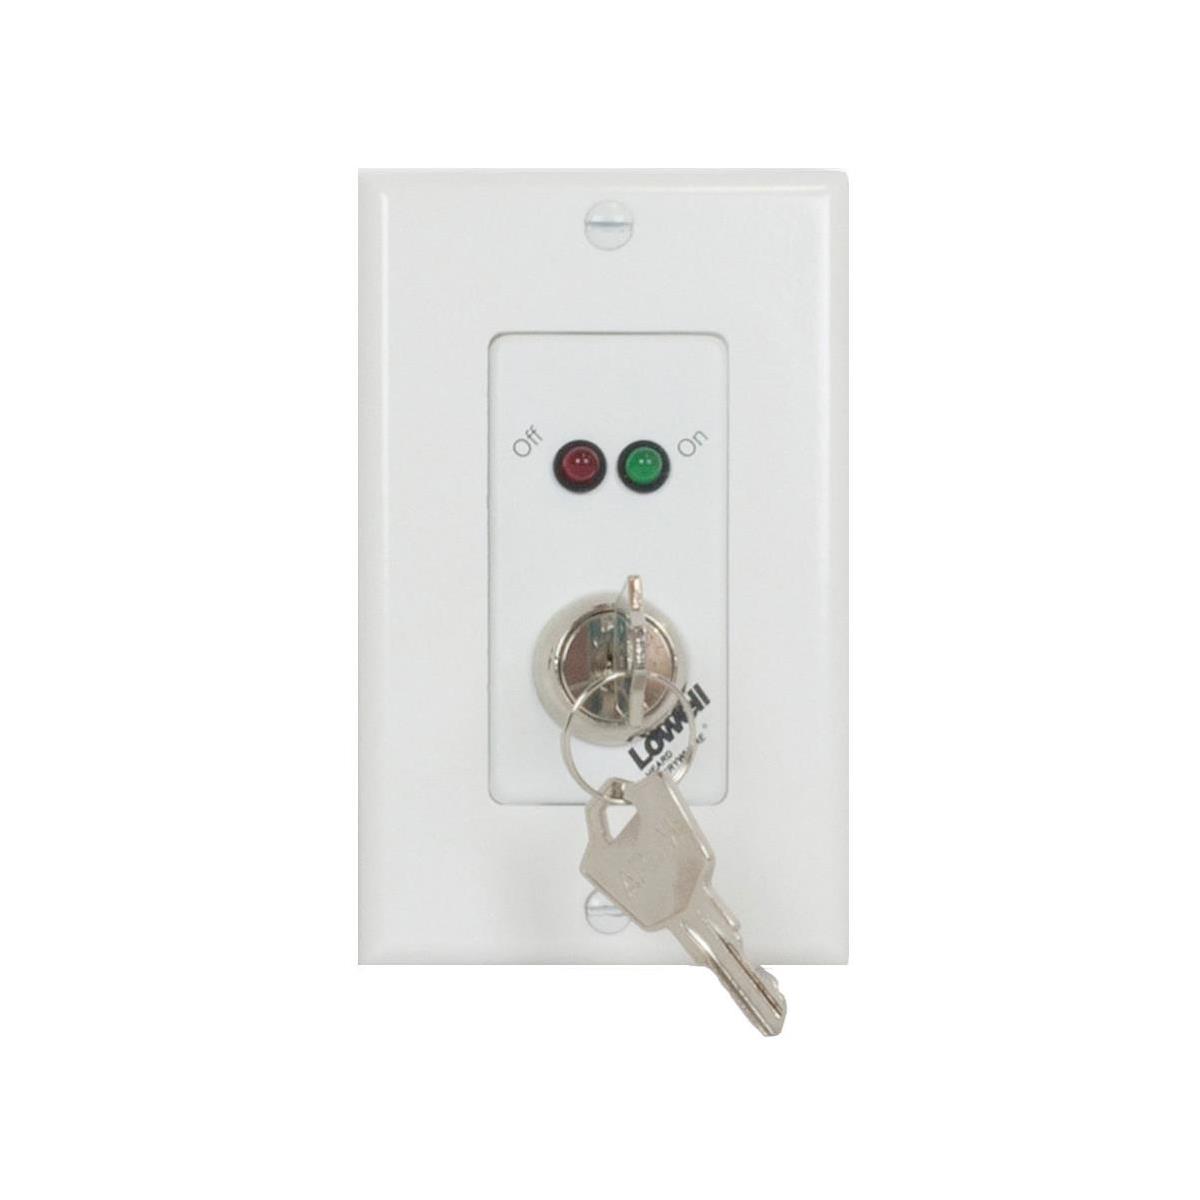 Image of Lowell Manufacturing RPSW2-MKP-RJ SPST Key-Switch